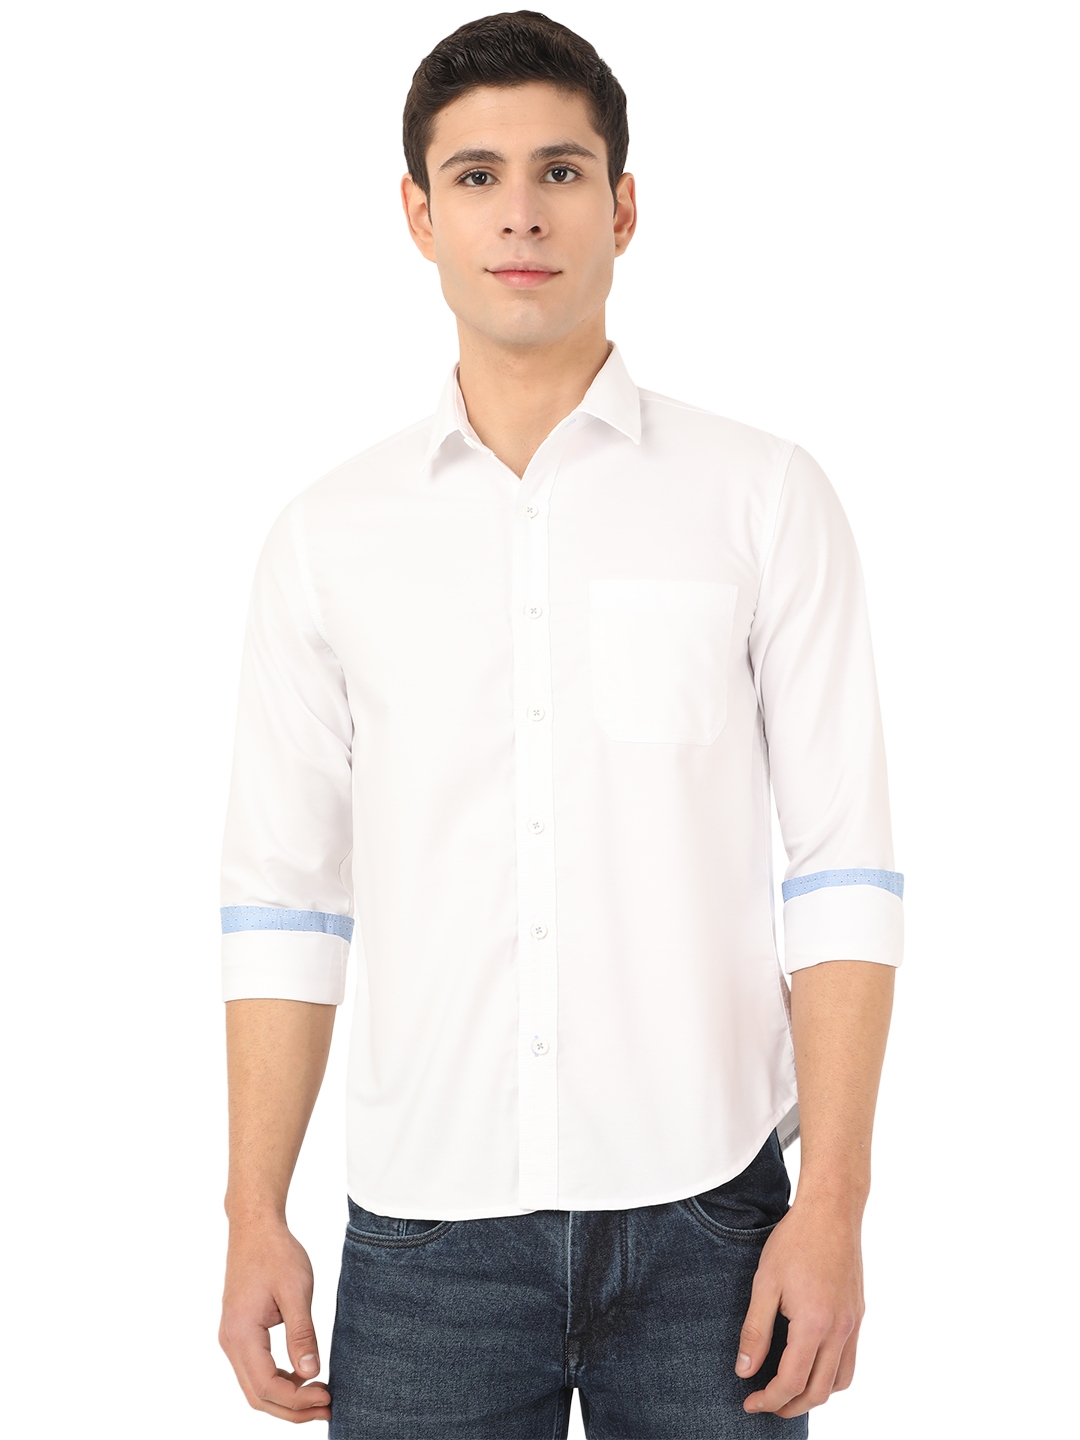 Greenfibre | Bright White Solid Slim Fit Semi Casual Shirt | Greenfibre